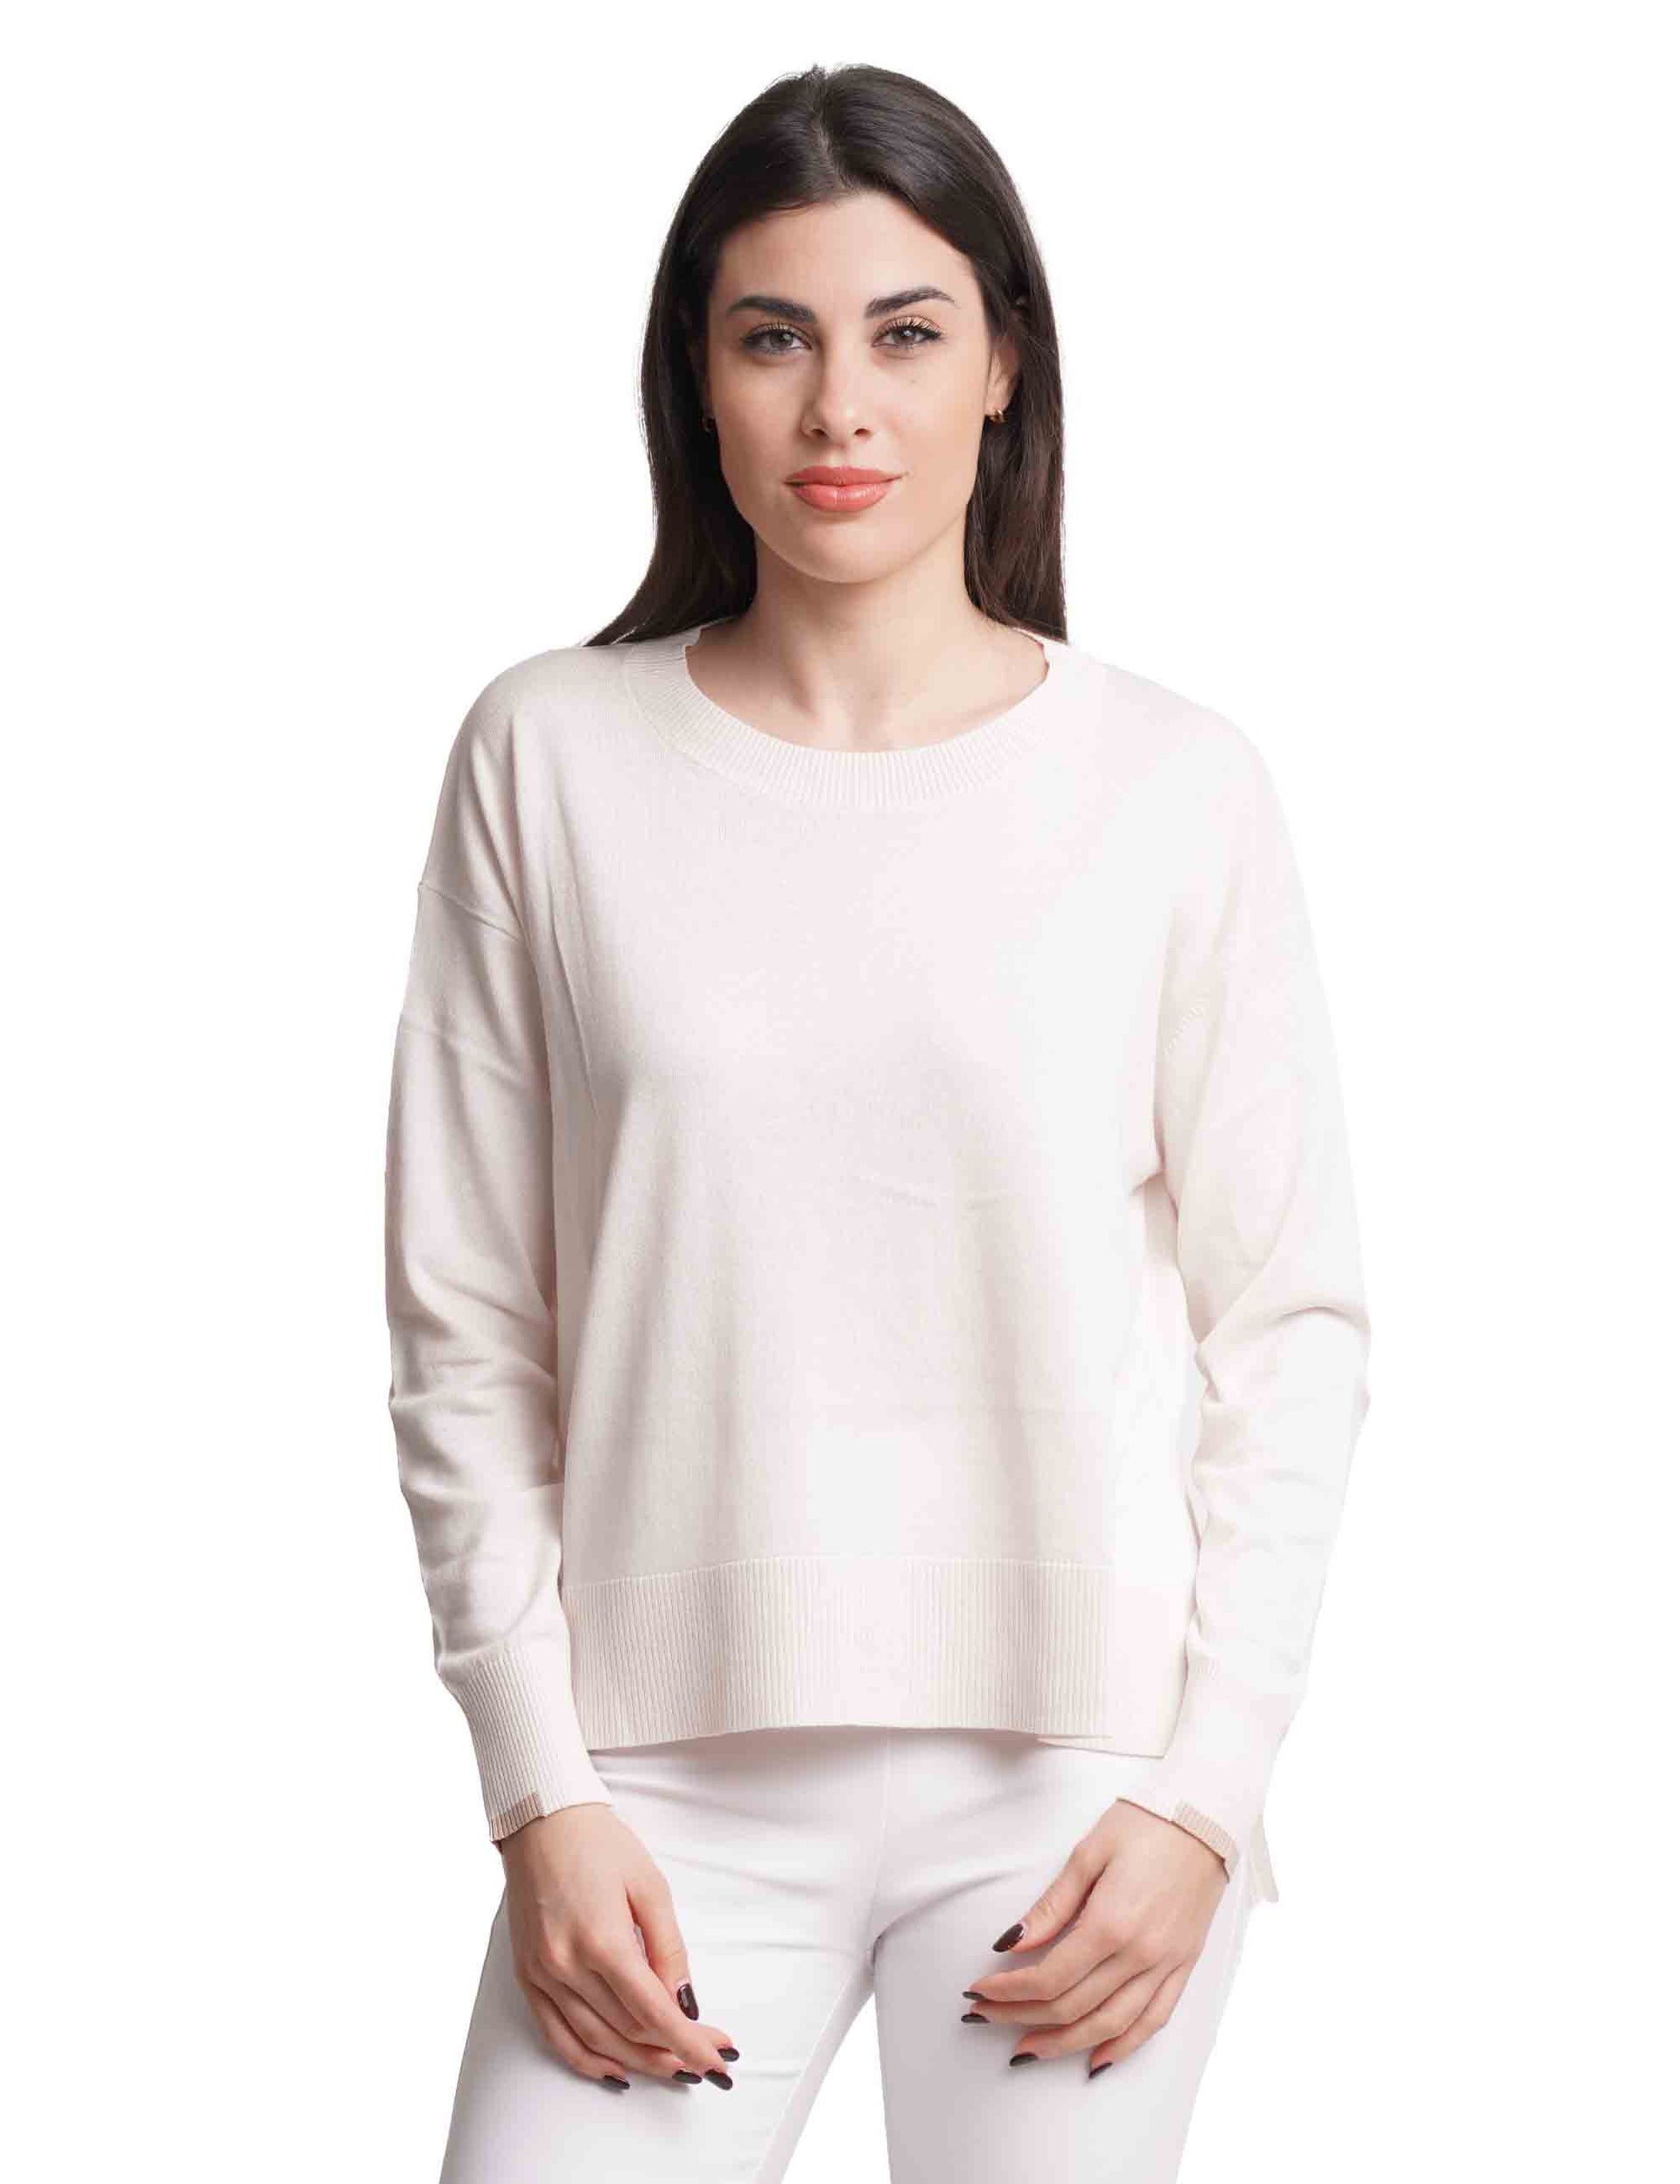 Smooth women's sweaters in dove gray cotton with long sleeves